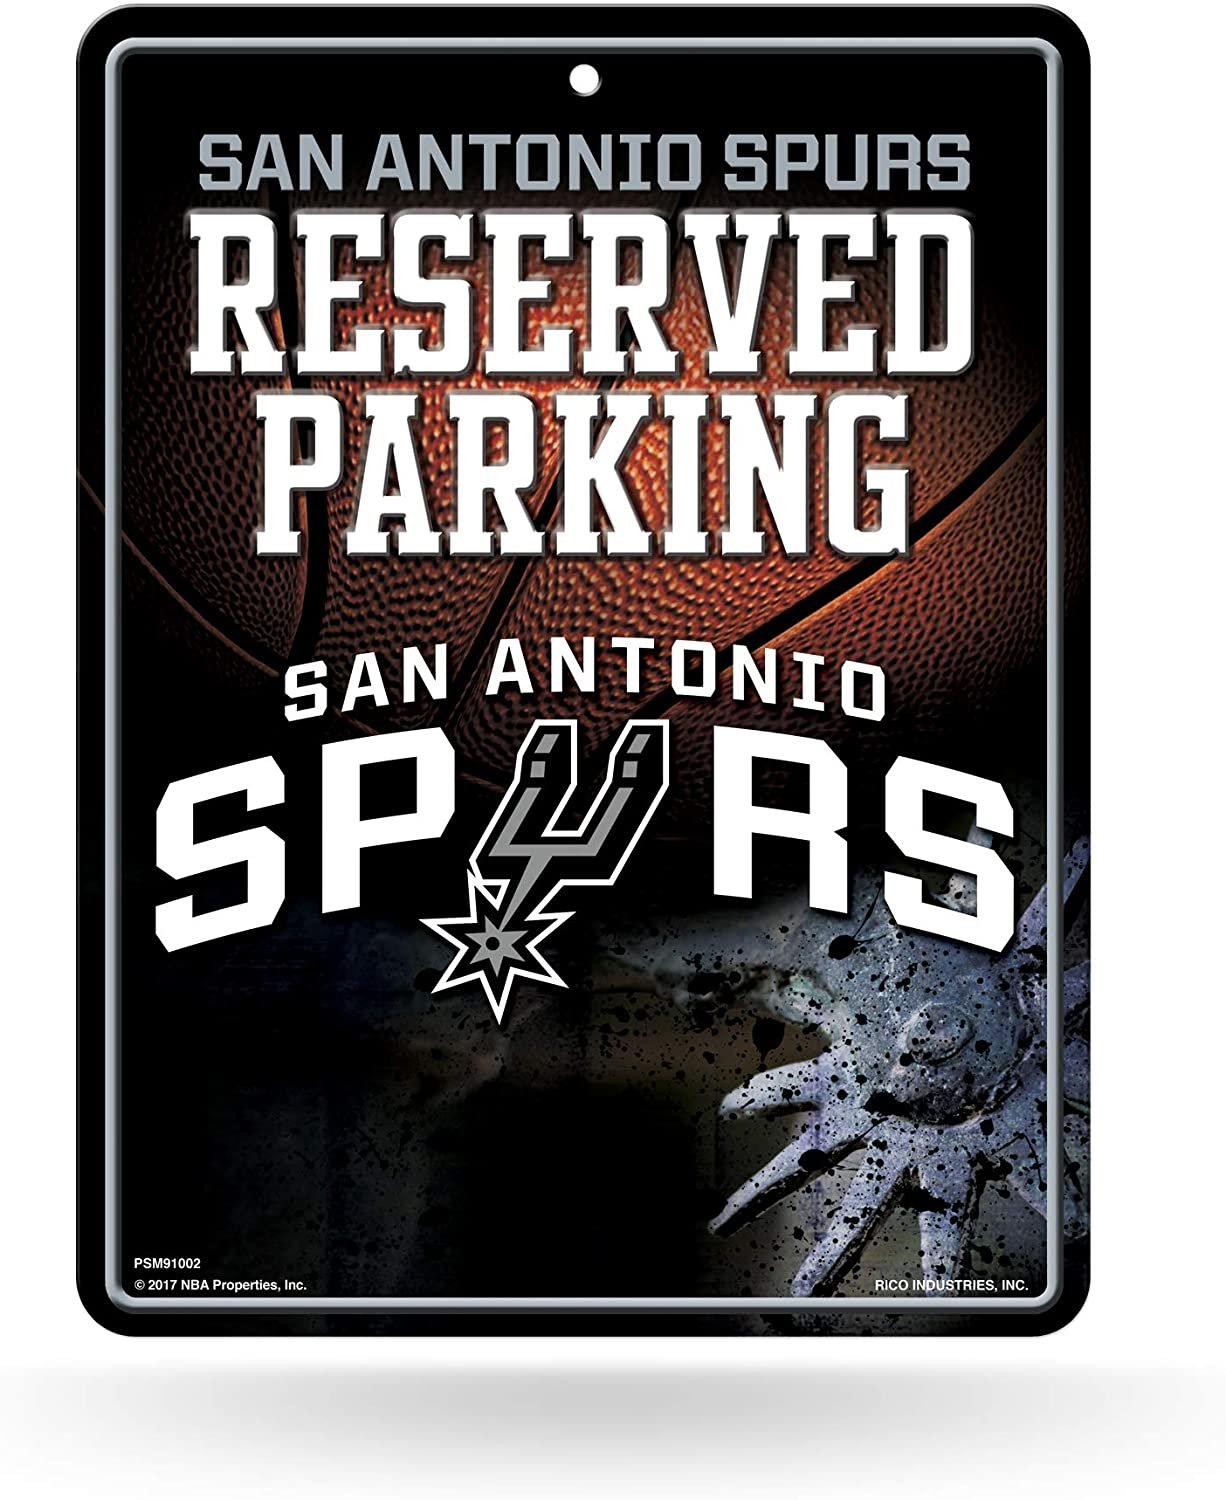 San Antonio Spurs 8.5-Inch by 11-Inch Metal Parking Sign Décor